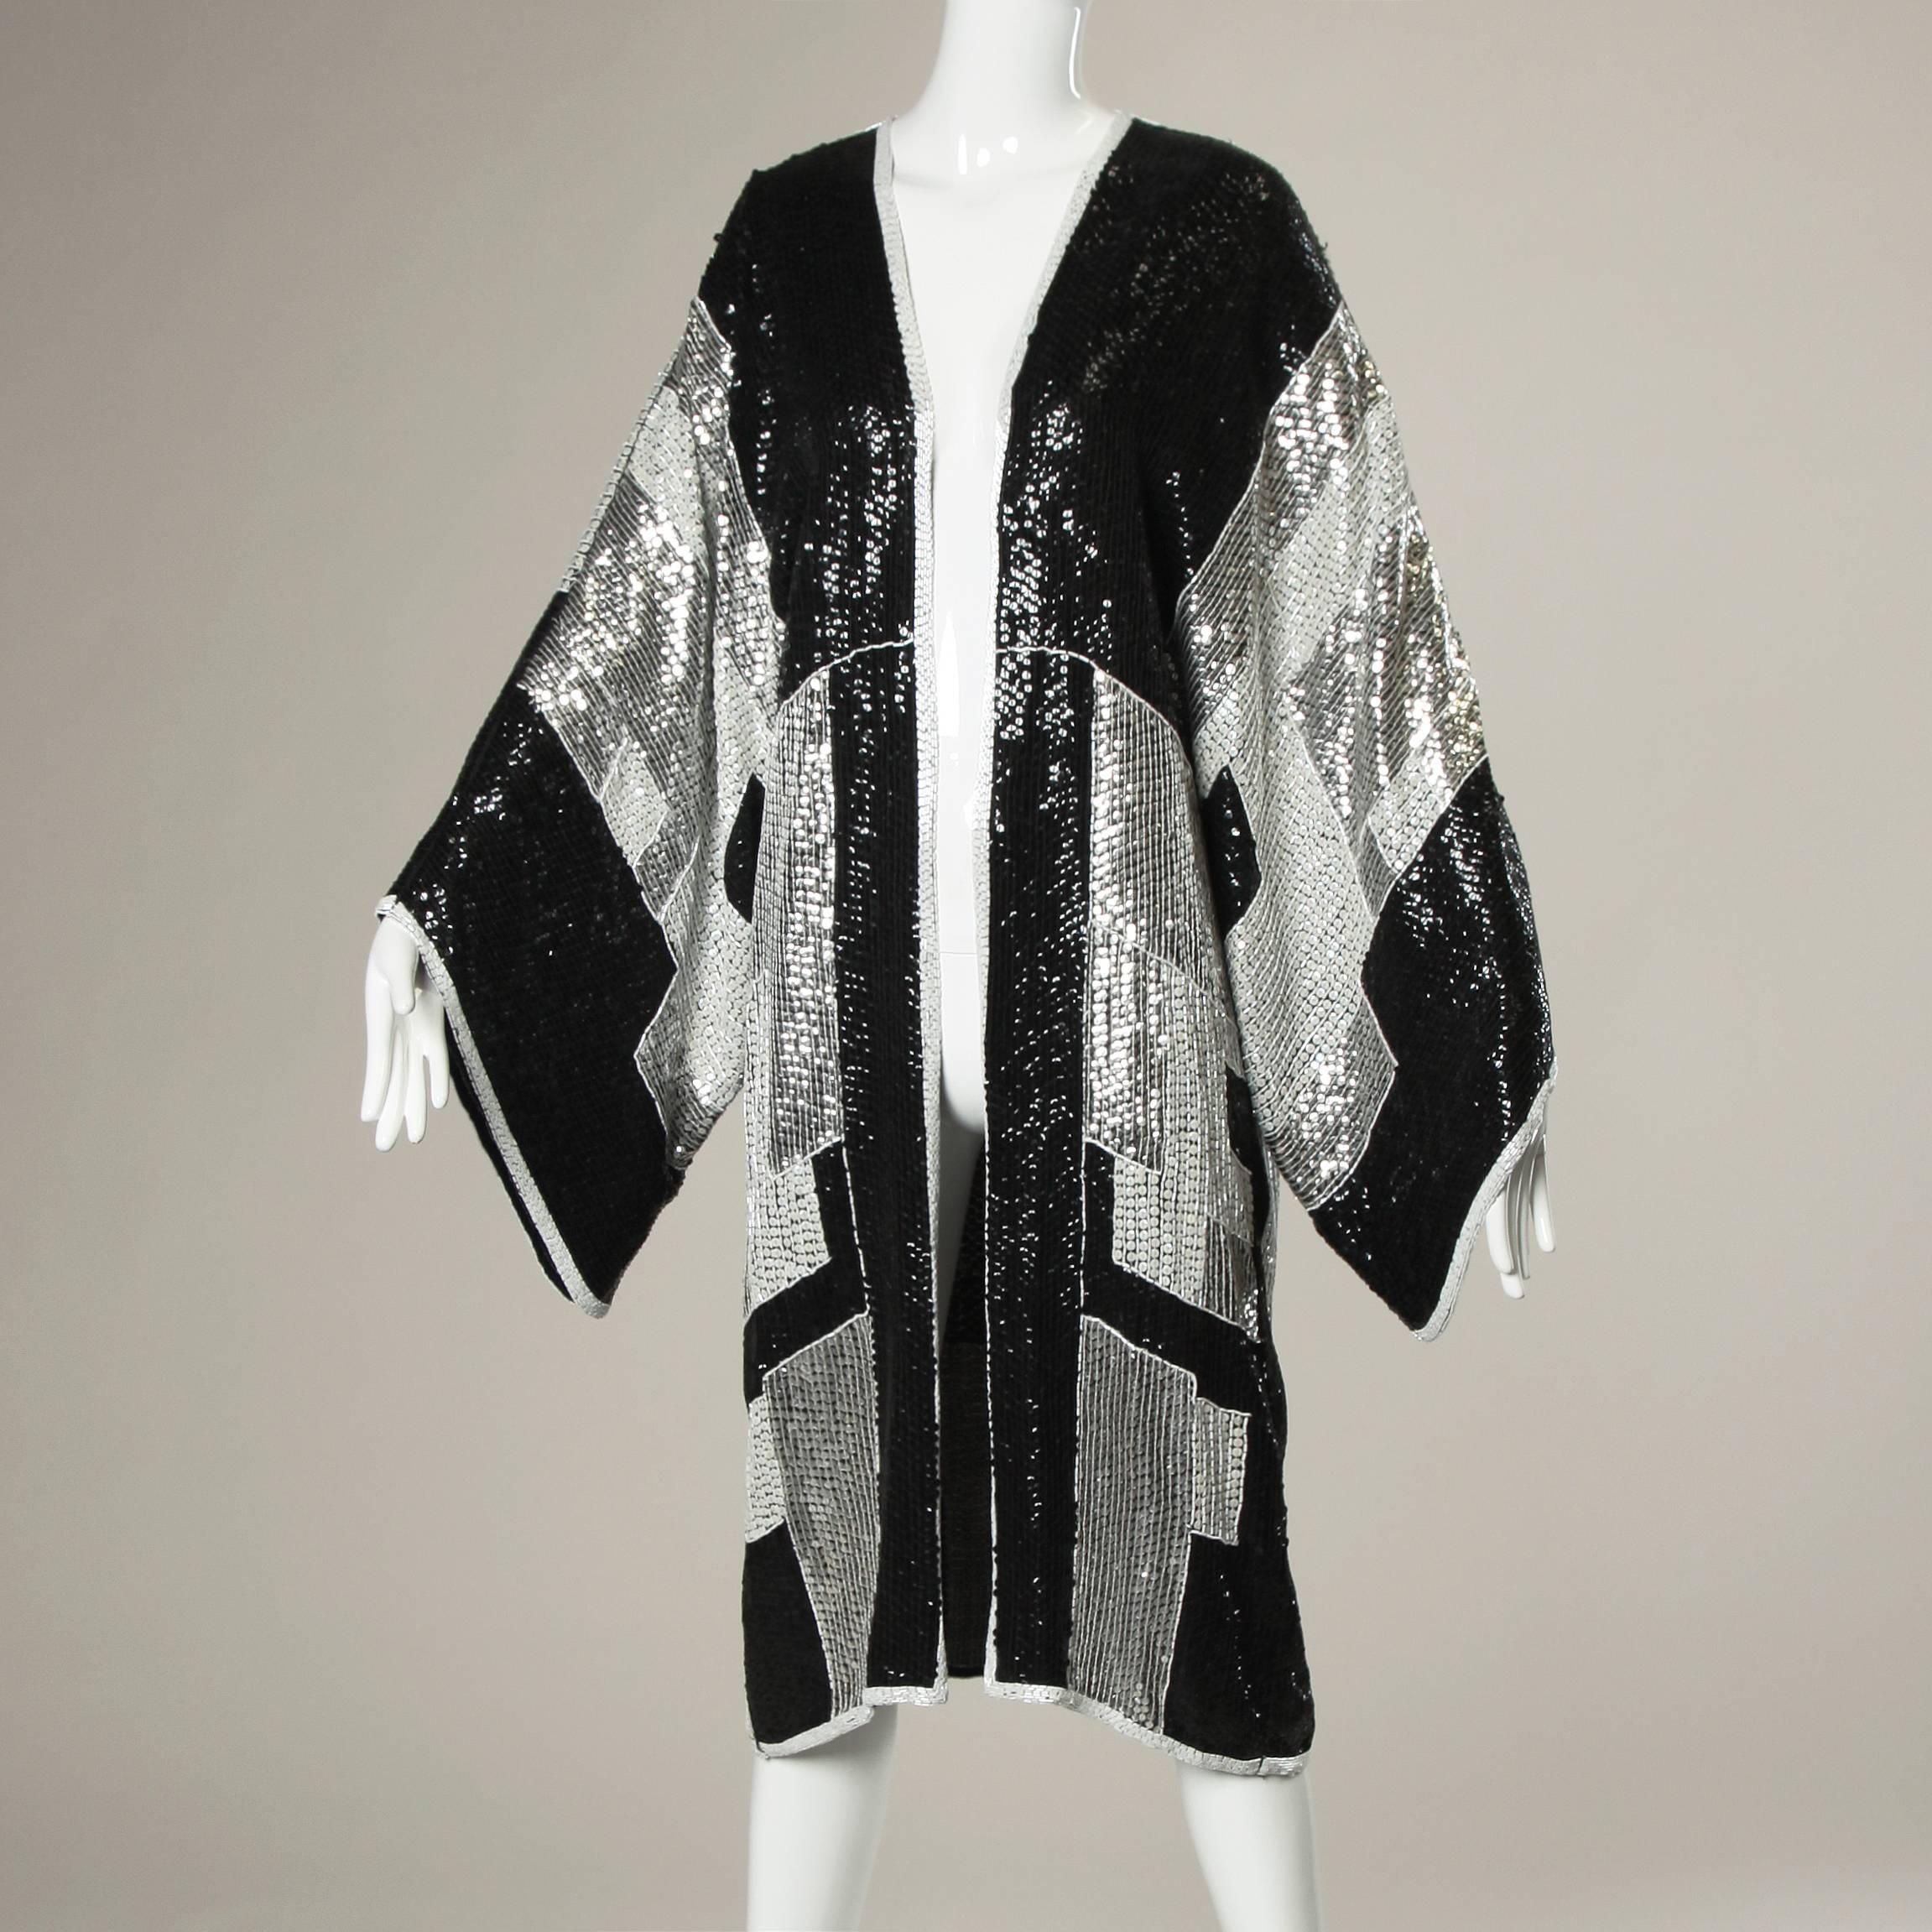 Unbelievable vintage 1985 Jeanette Kastenberg kimono jacket or duster with massive dolman sleeves and long oversized fit. Entirely covered in tiny sequins and beads. Incredible piece!

Details:

Unlined
Back Zip and Hook Closure
Marked Size: